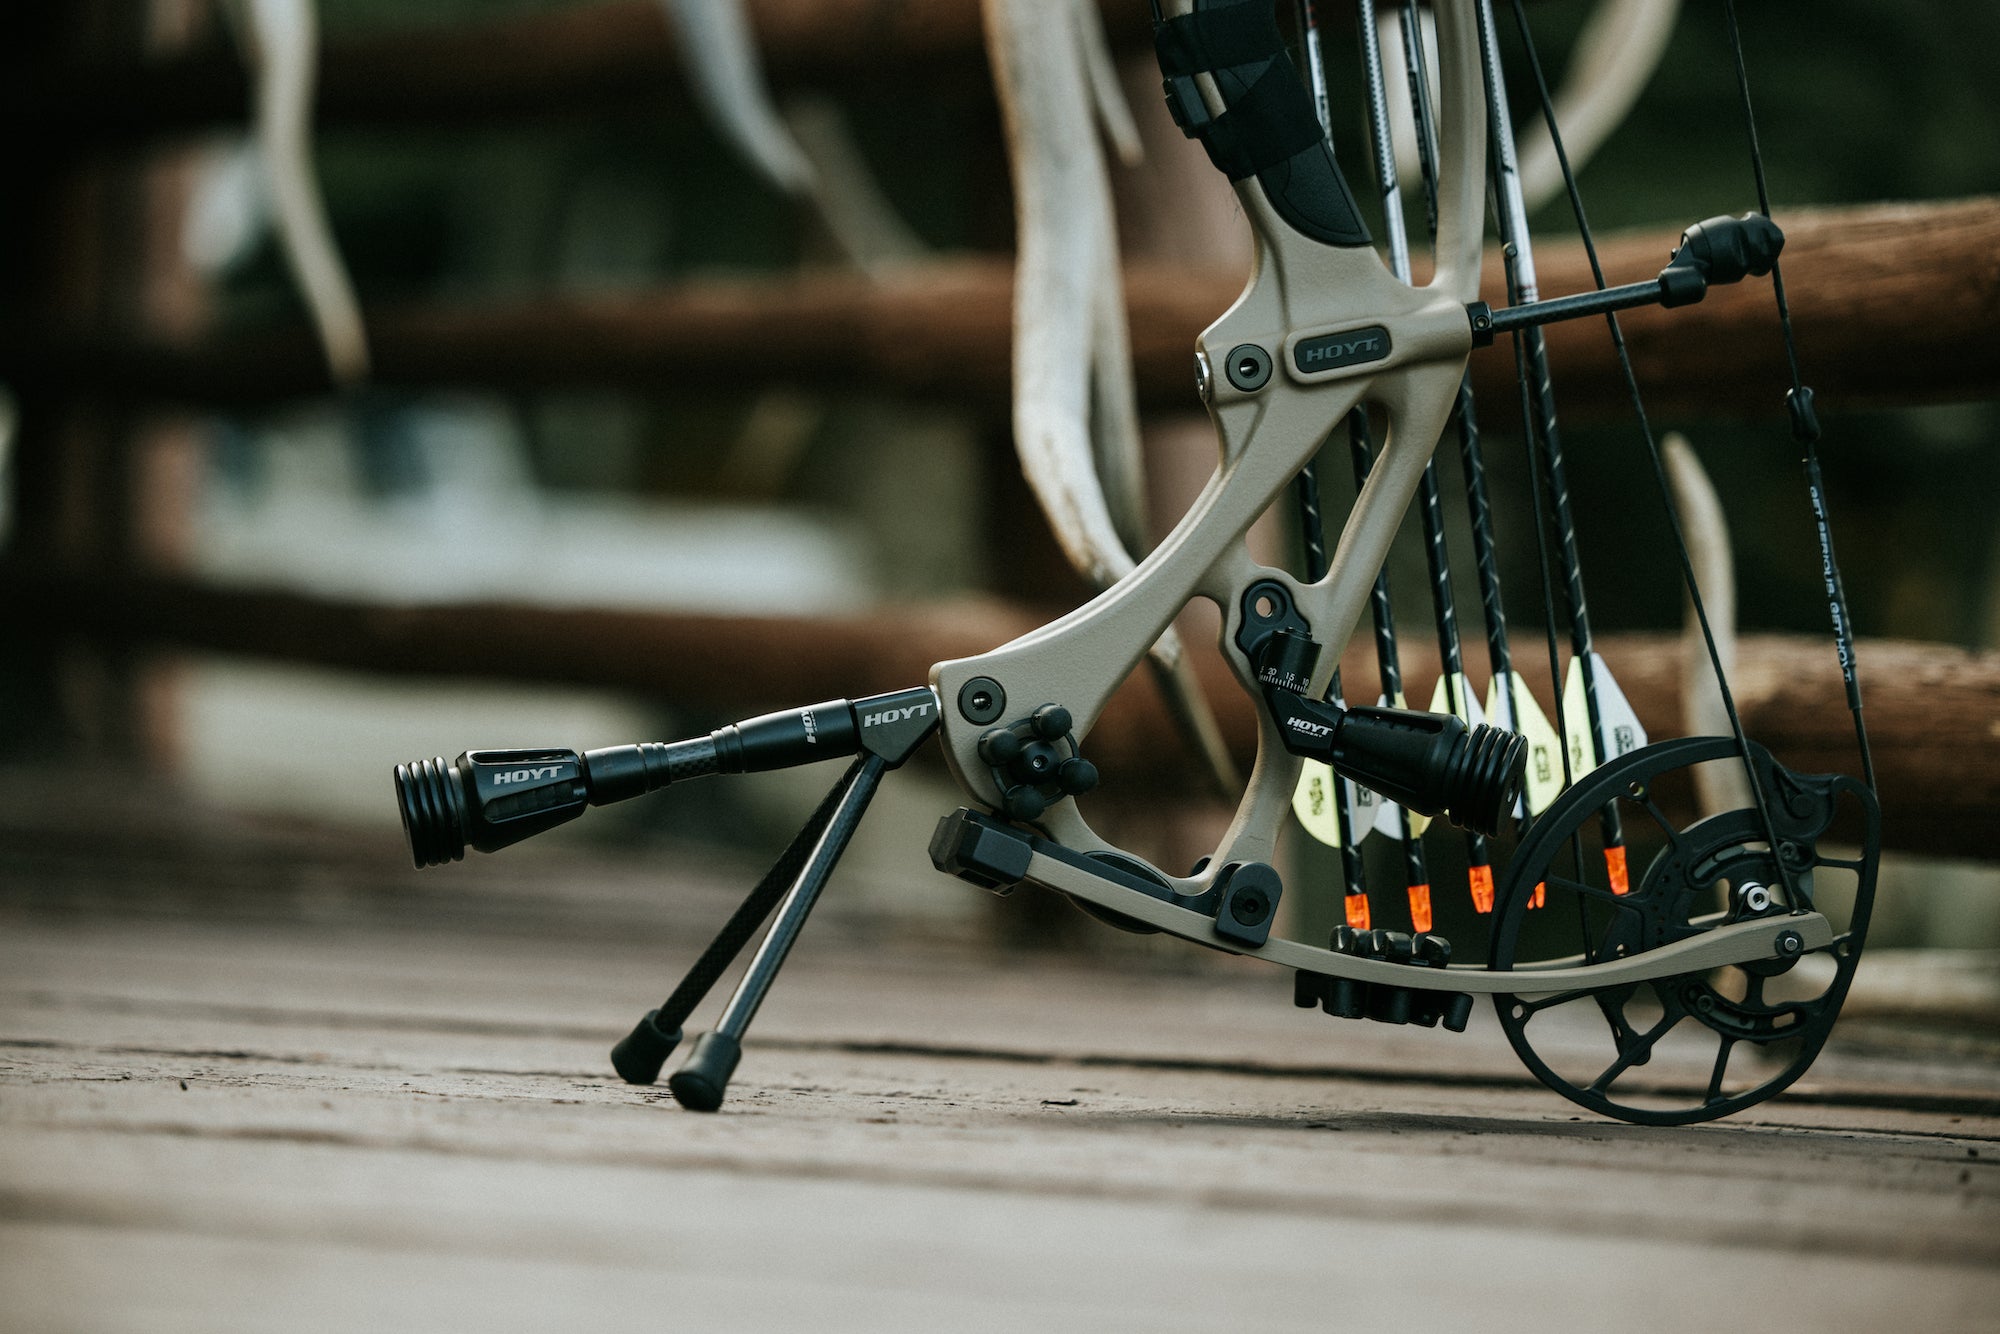 photo of Hoyt RX-7 compound bow